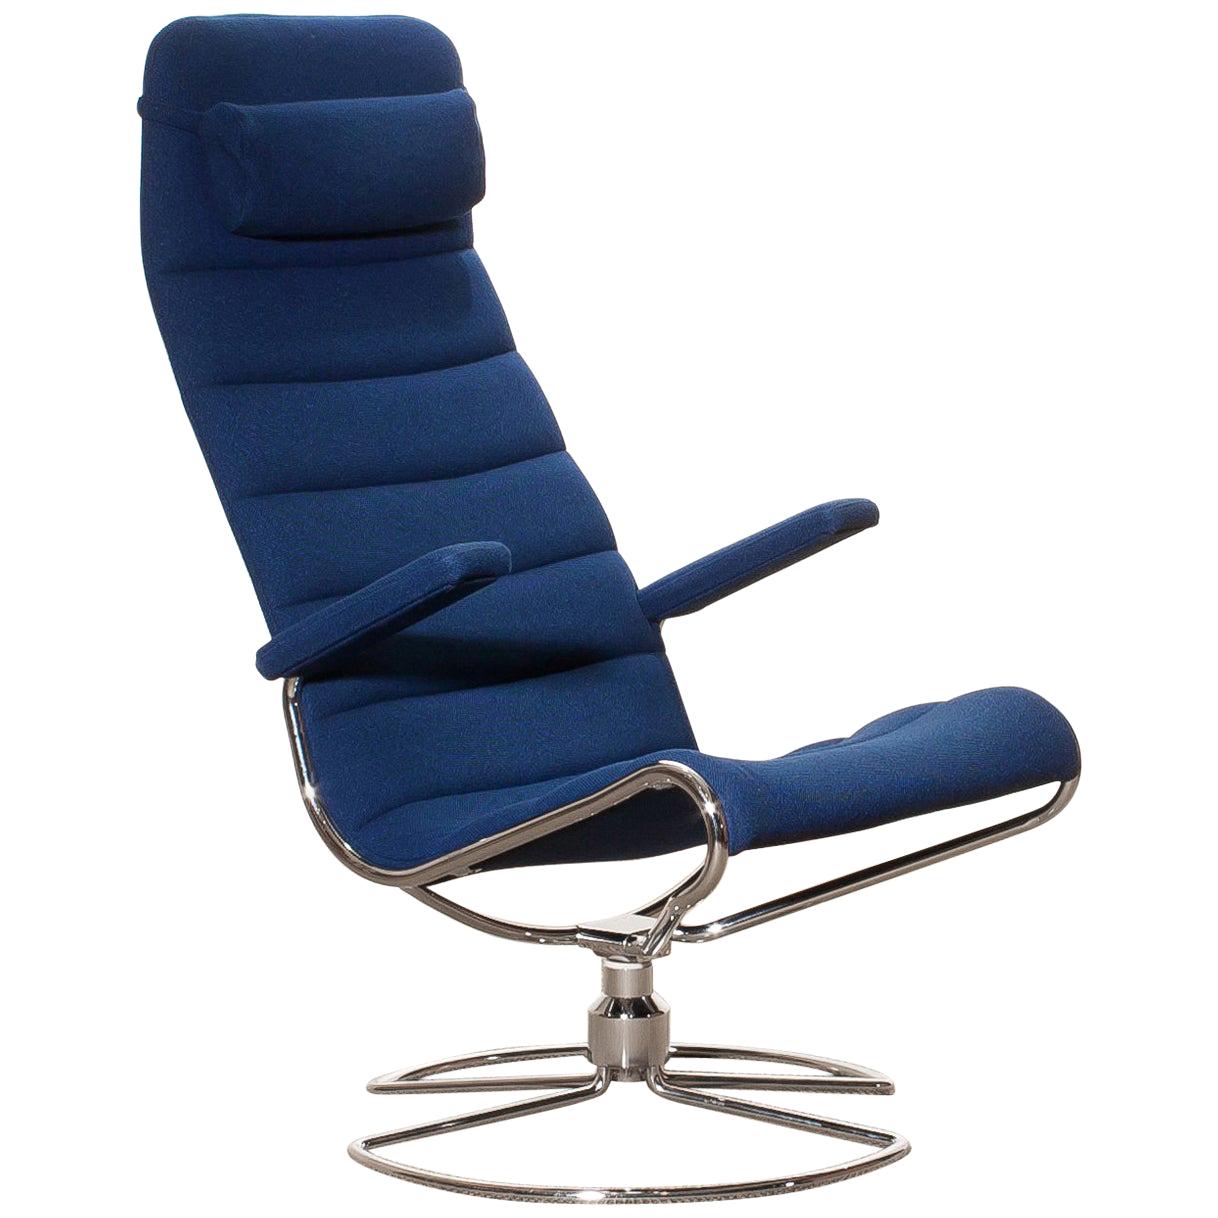 Beautiful 'Minister' chair designed by Bruno Mathsson.
It is upholstered with a Royal blue wooden fabric mounted on a swivel base of tubular chromed steel.
The chair is in very good condition.
Period 1980s.
Dimensions: H 109 cm x W 60 cm x D 77